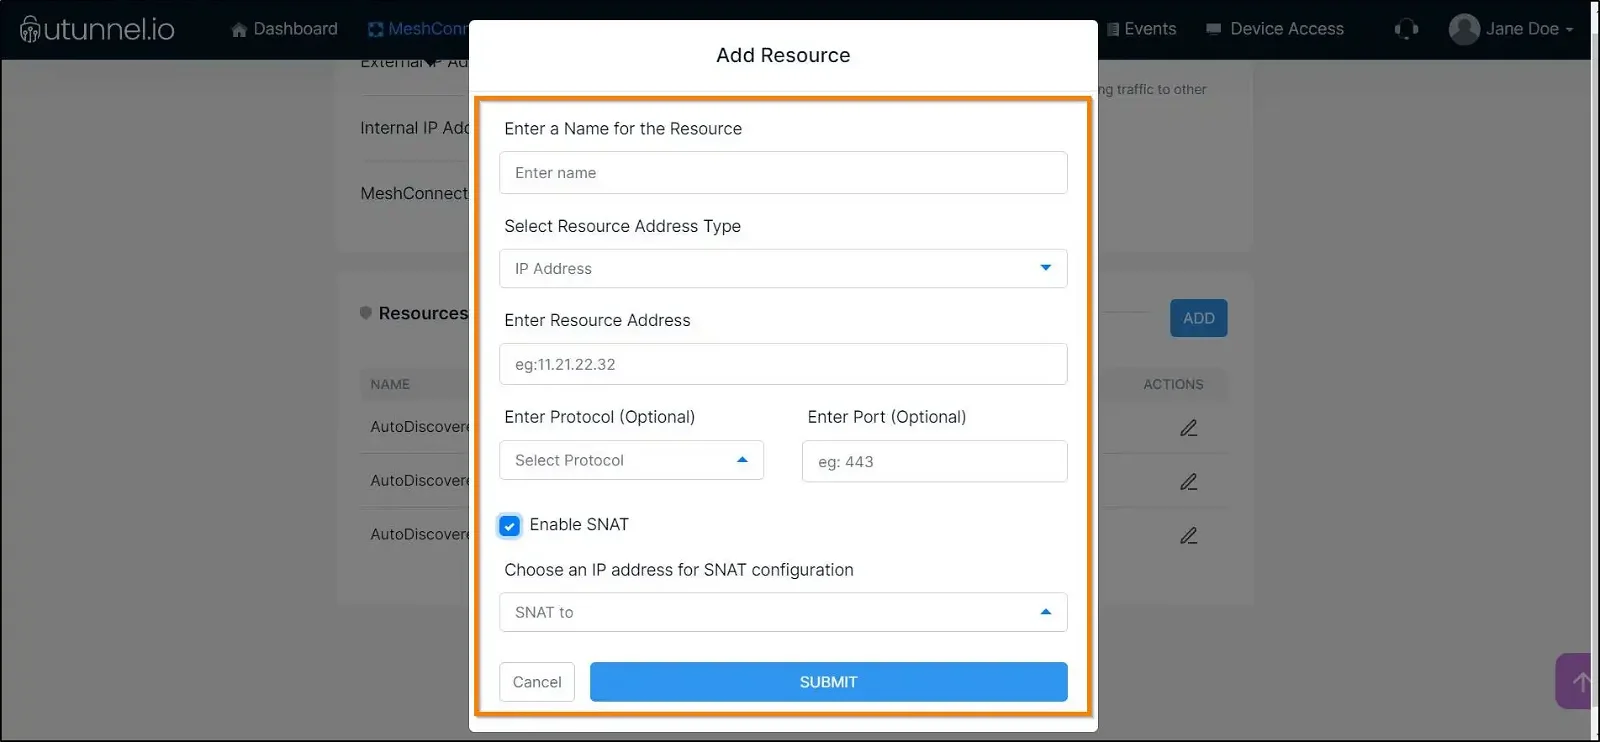 How to manage resources on a MeshConnect Site add resource pop-up window